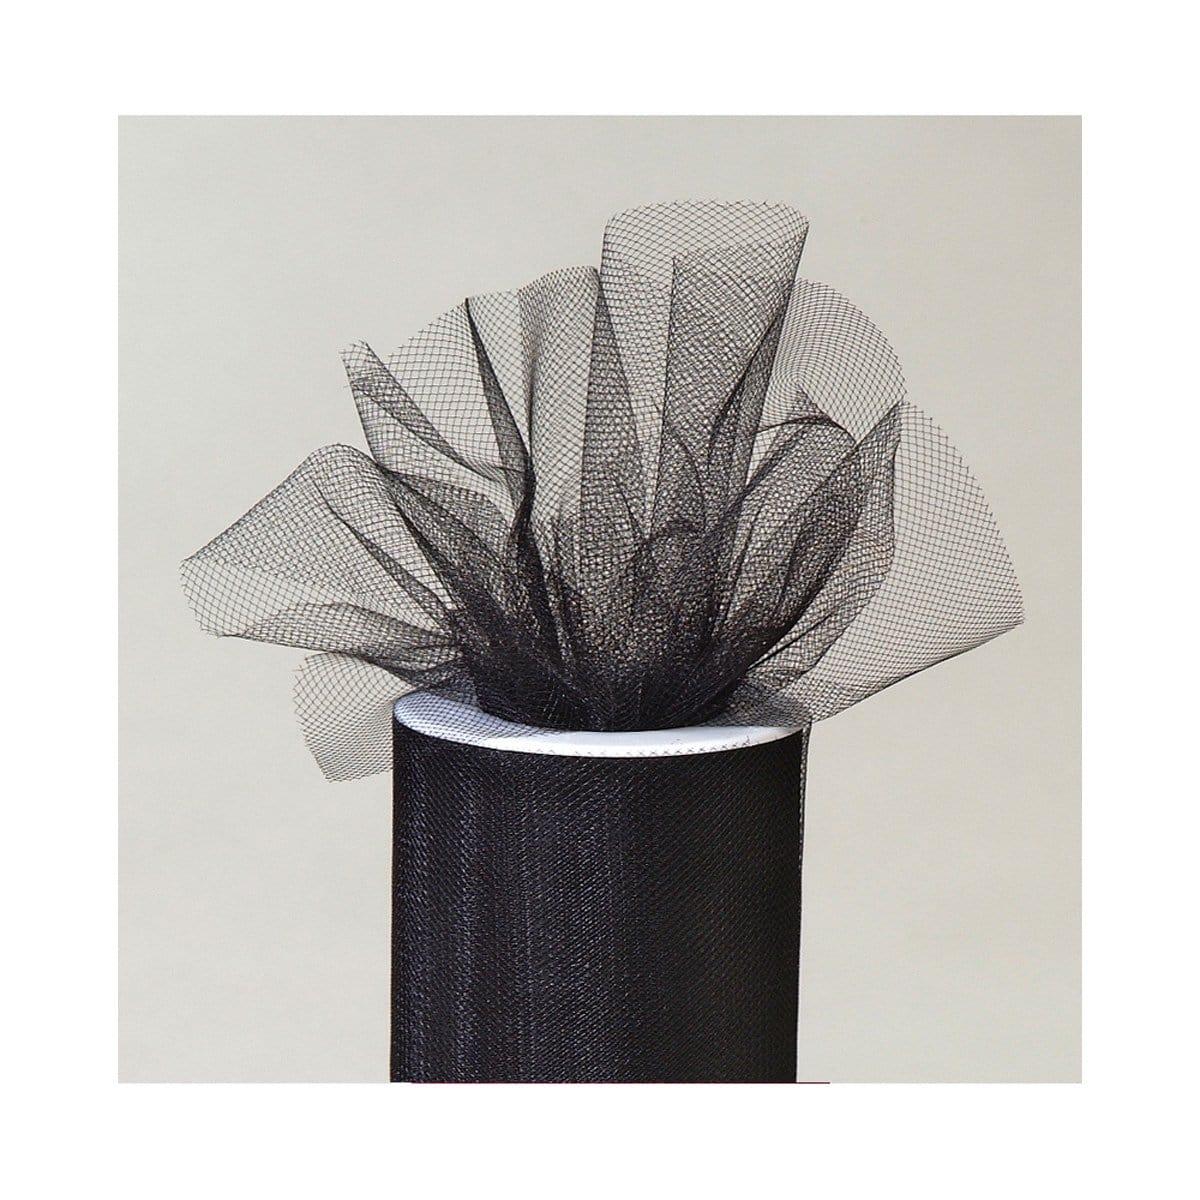 Buy Decorations Tulle Roll - Black 6.5 in. x 25 yds sold at Party Expert